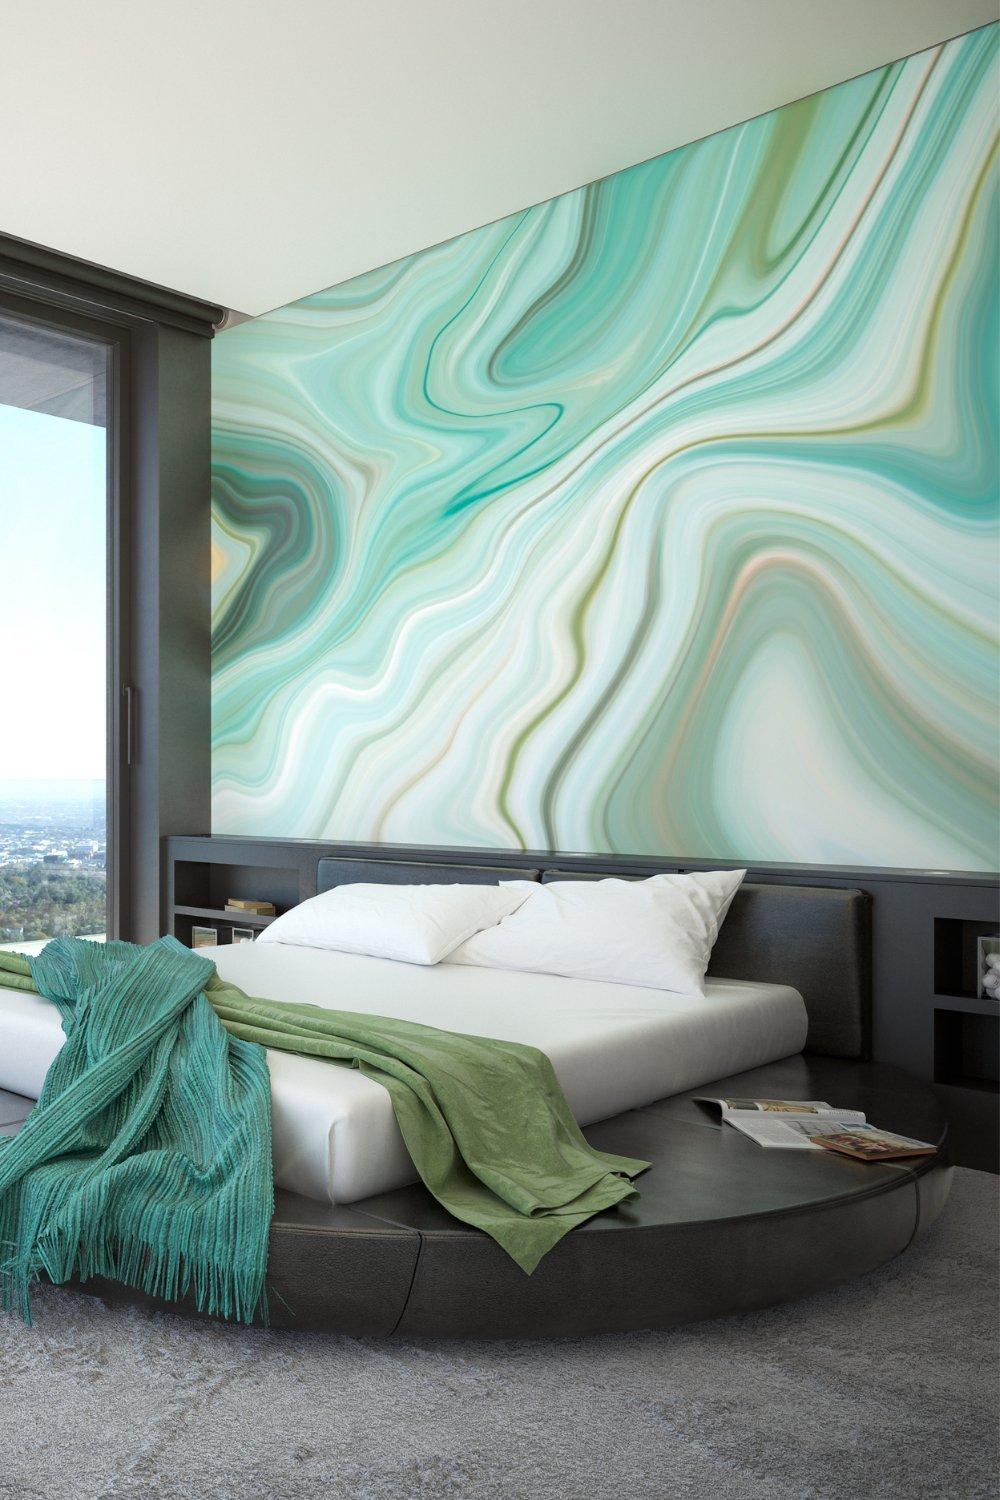 Marbled Ink Wall Matt Smooth Paste the Wall Mural 300cm wide x 240cm high